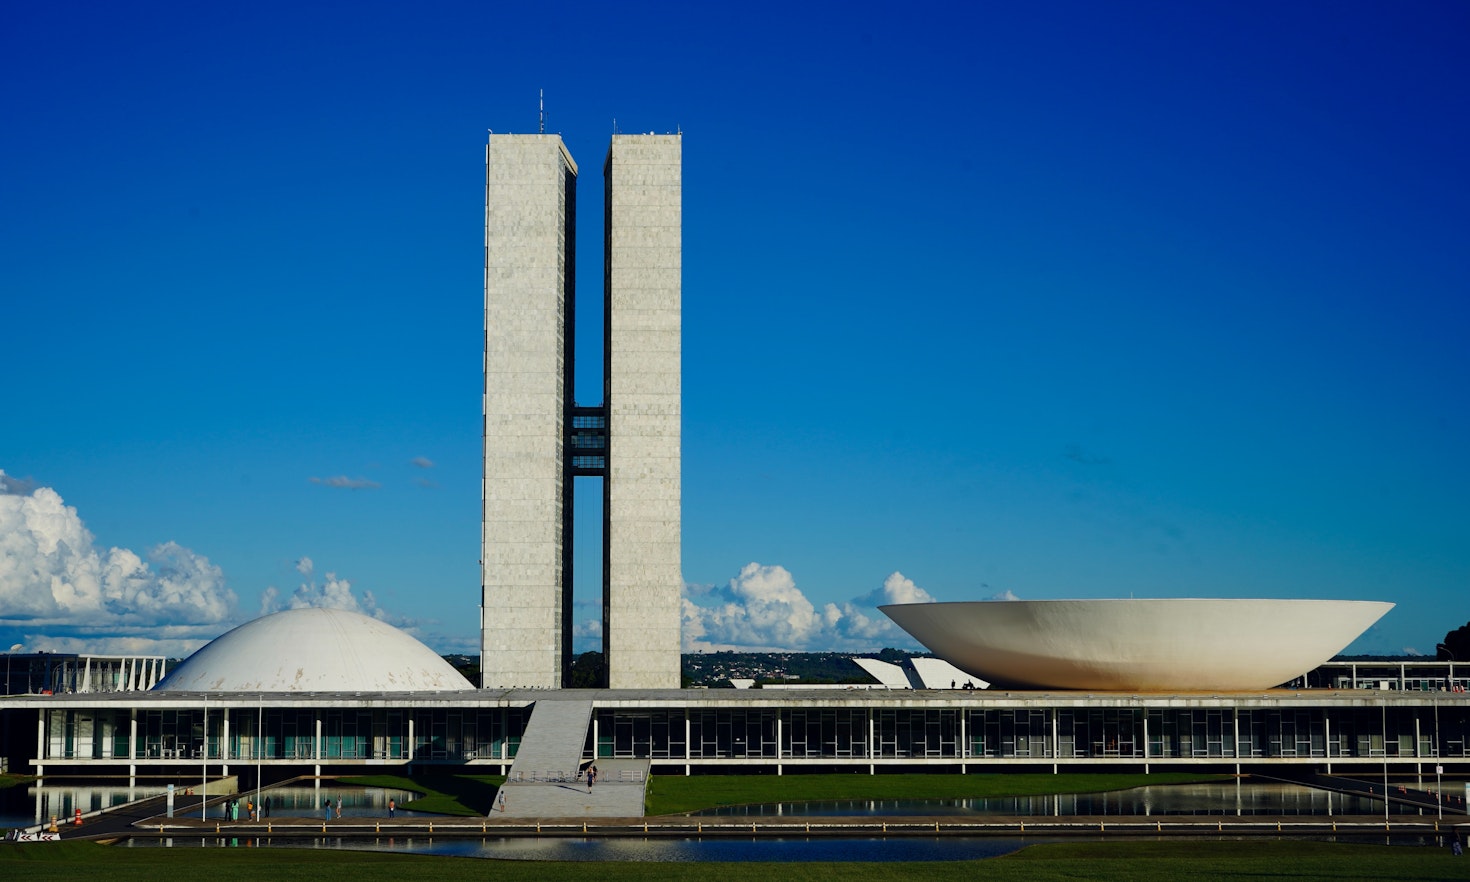 The Council of Federation:  A New Era for Brazilian Federalism and Democracy